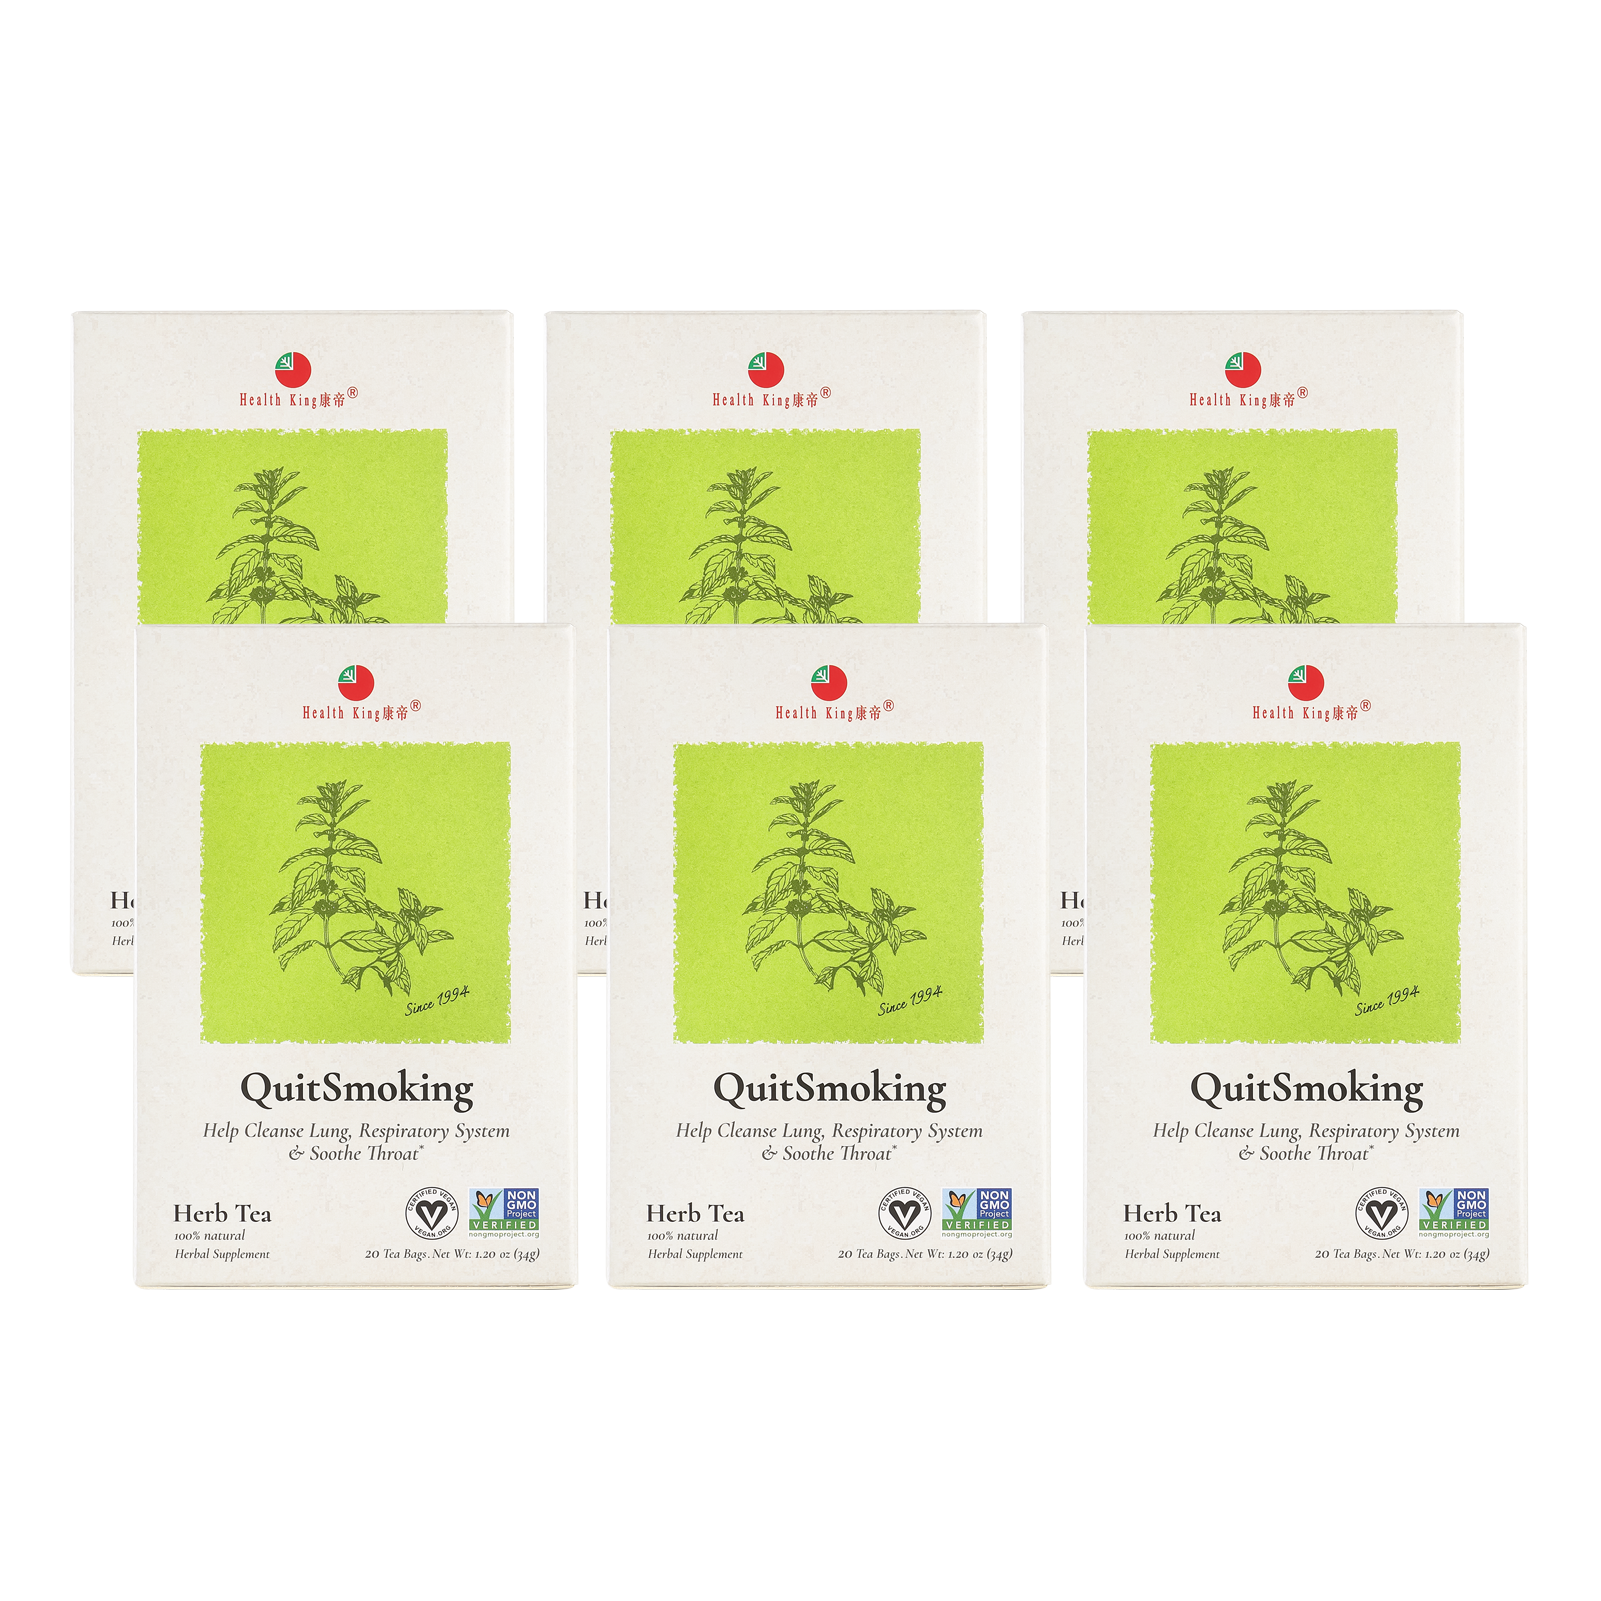 Six packages of Quit Smoking Herb Tea displayed against a white backdrop, highlighting the lung-cleansing benefits